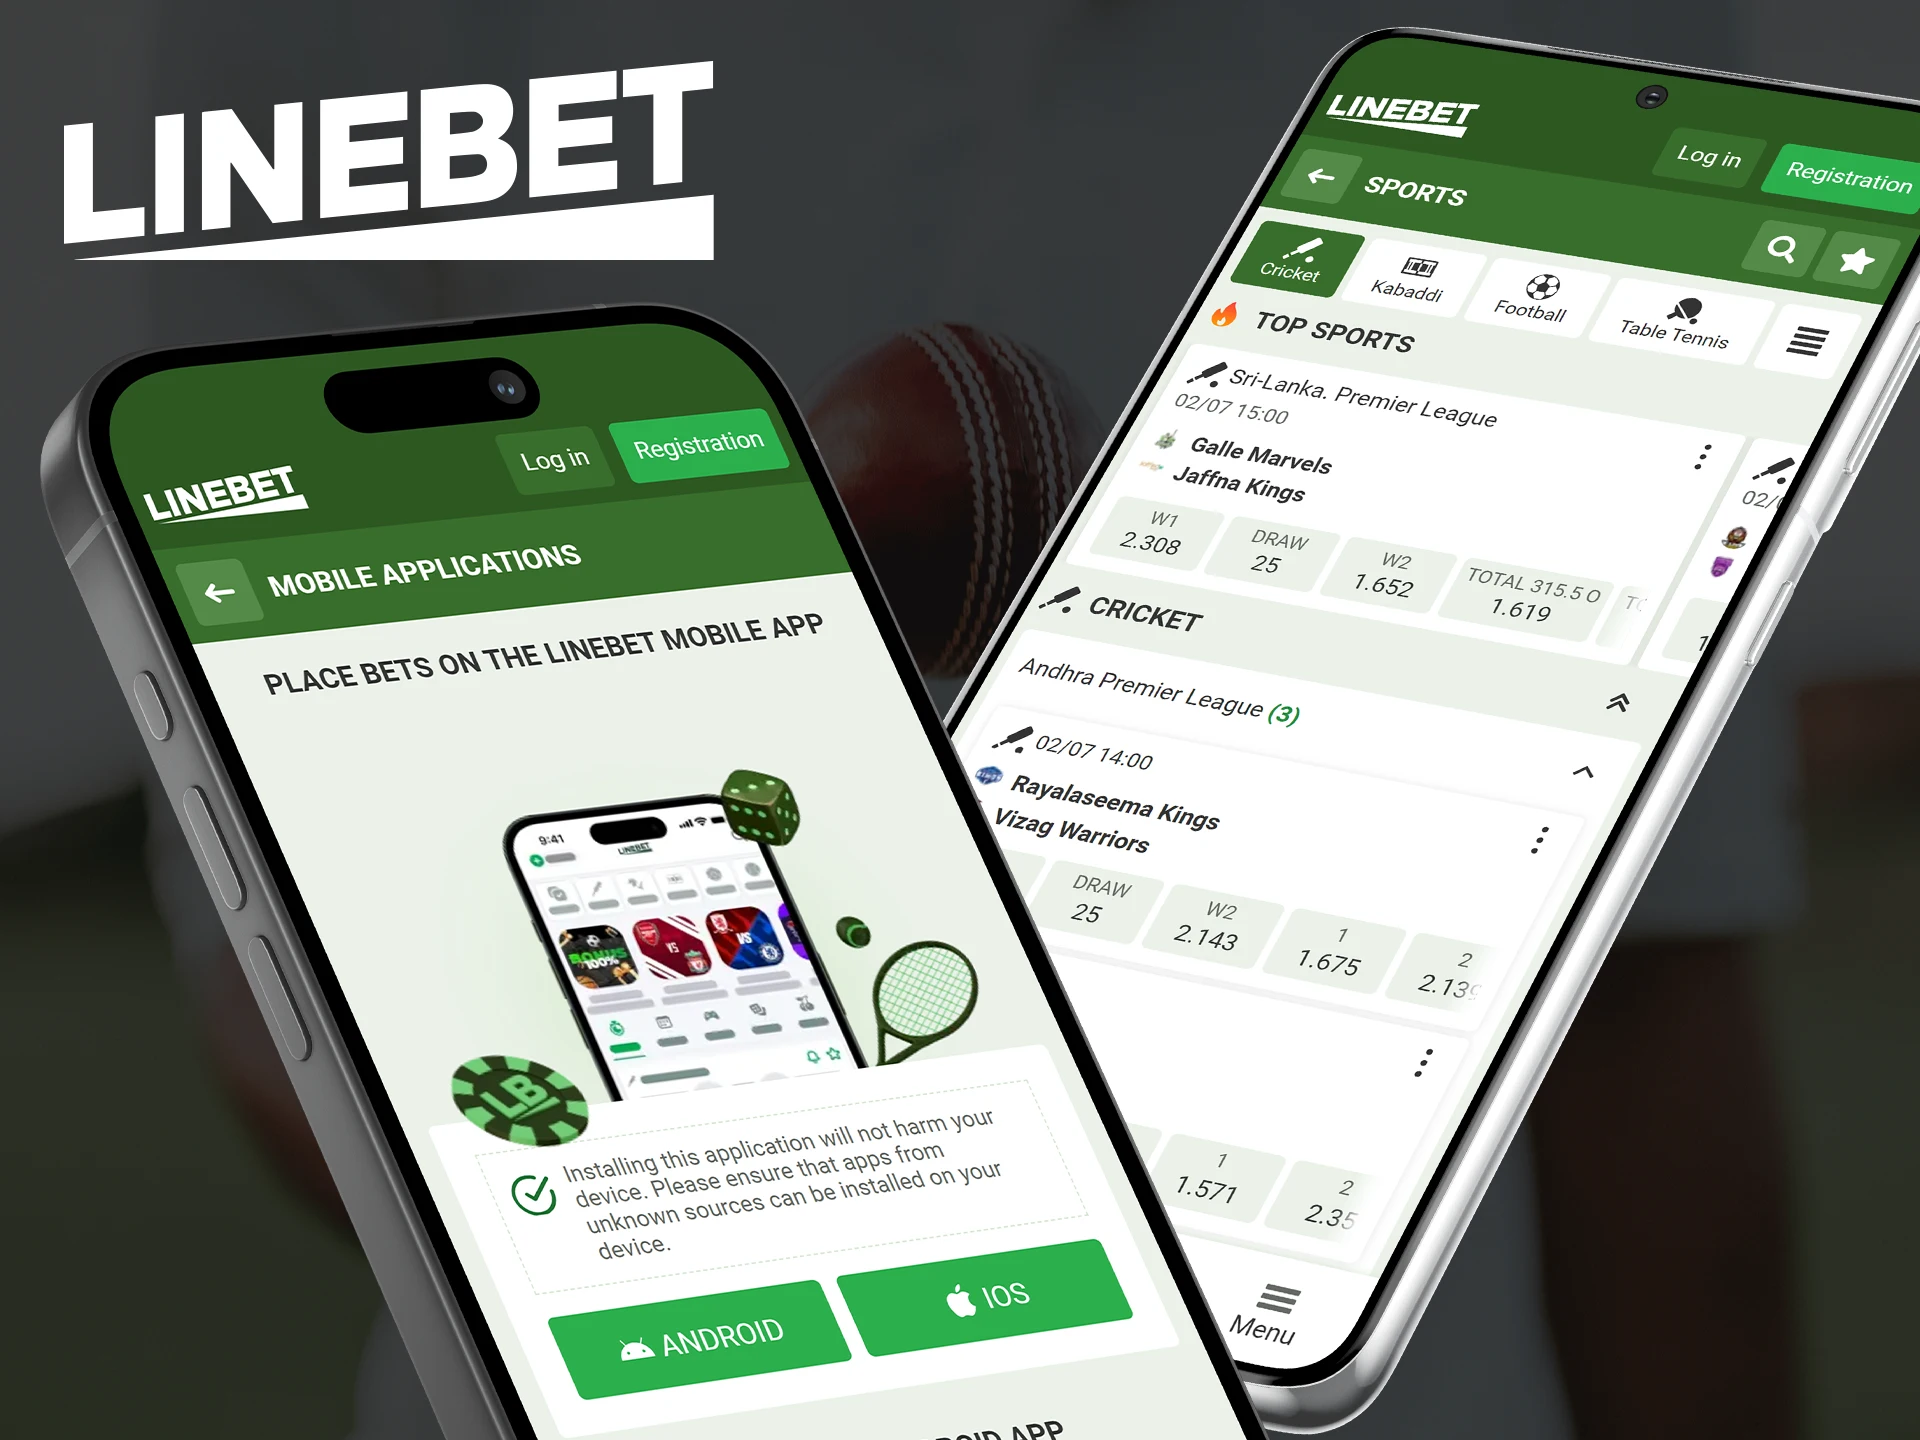 Install the Linebet app on your phone and bet on cricket anytime.